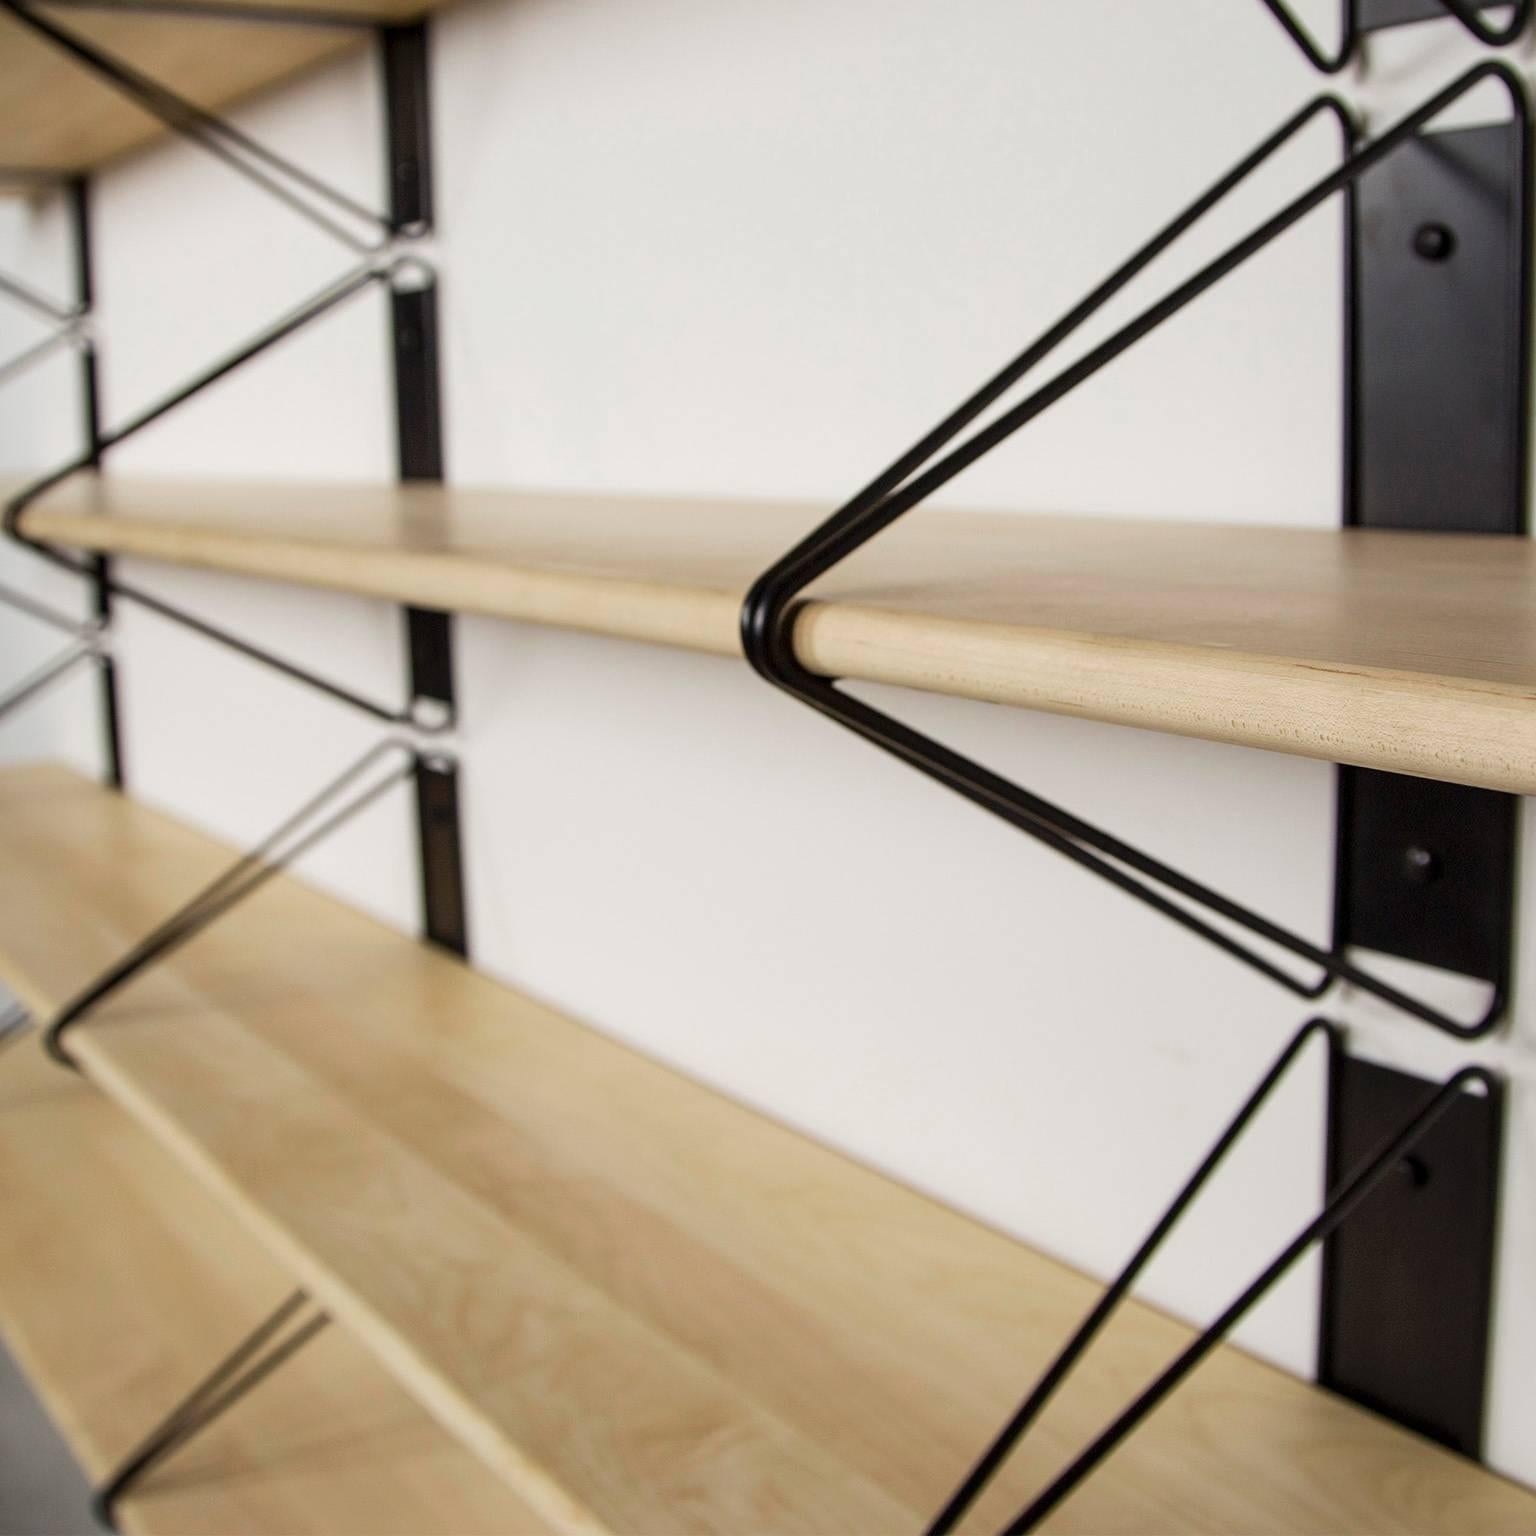 Contemporary Set of 5 Strut Shelves from Souda, 52in, Black and Walnut, Made to Order For Sale